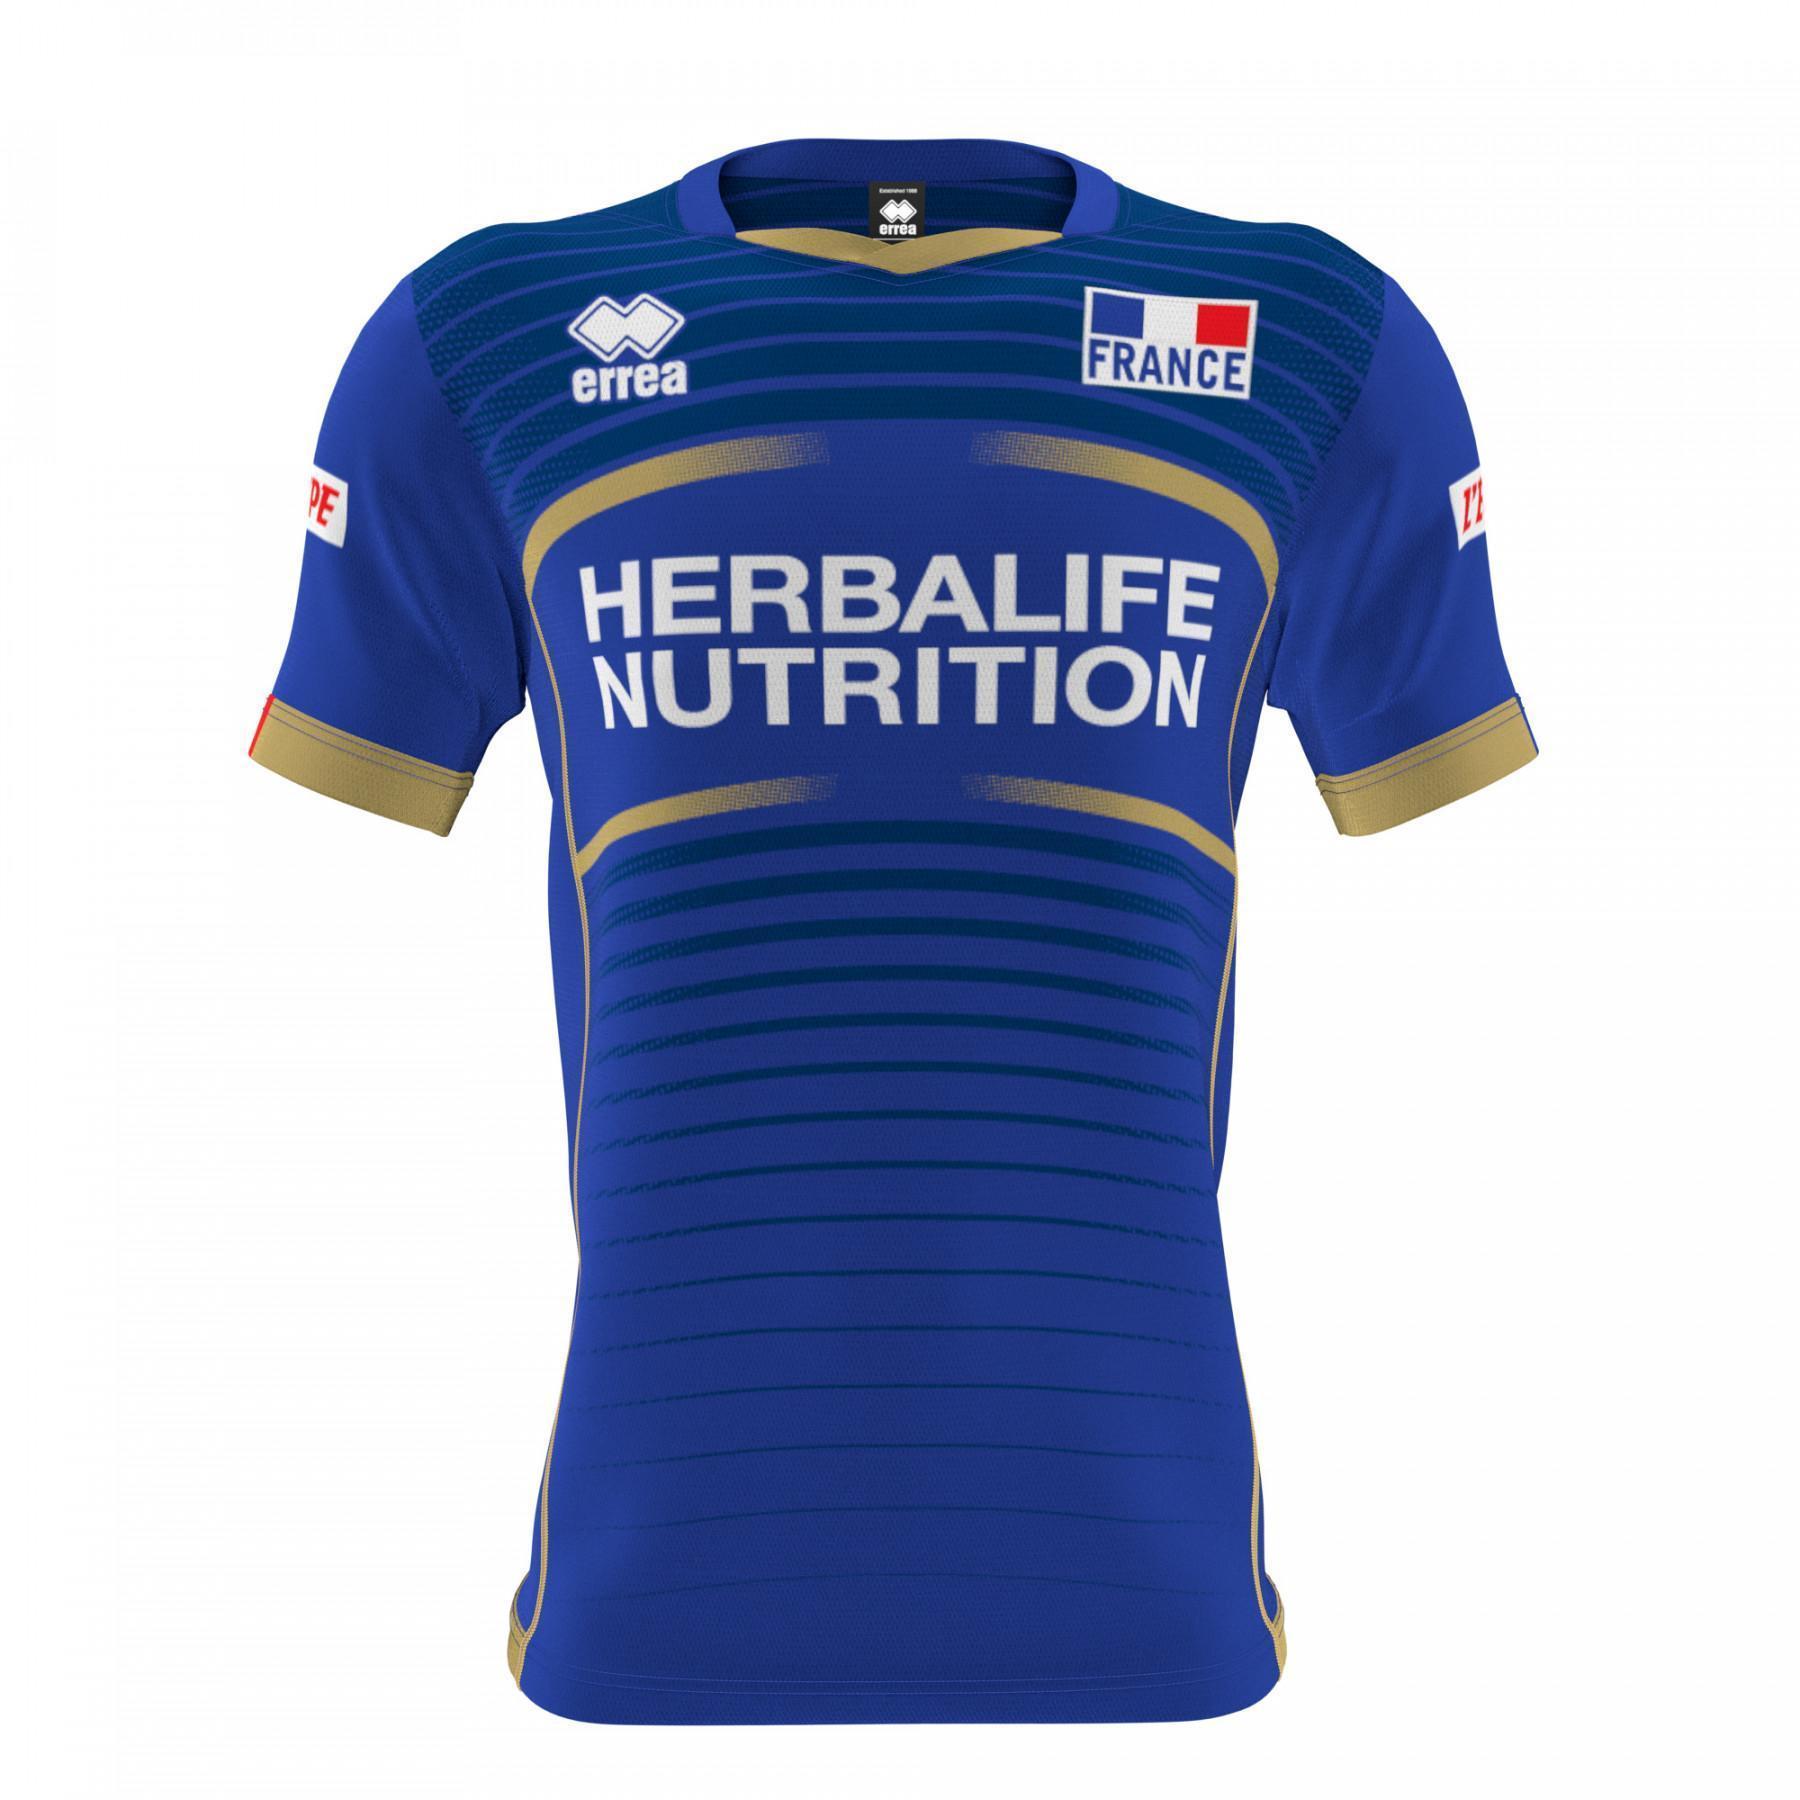 Kid's jersey from france Volleyball 2019